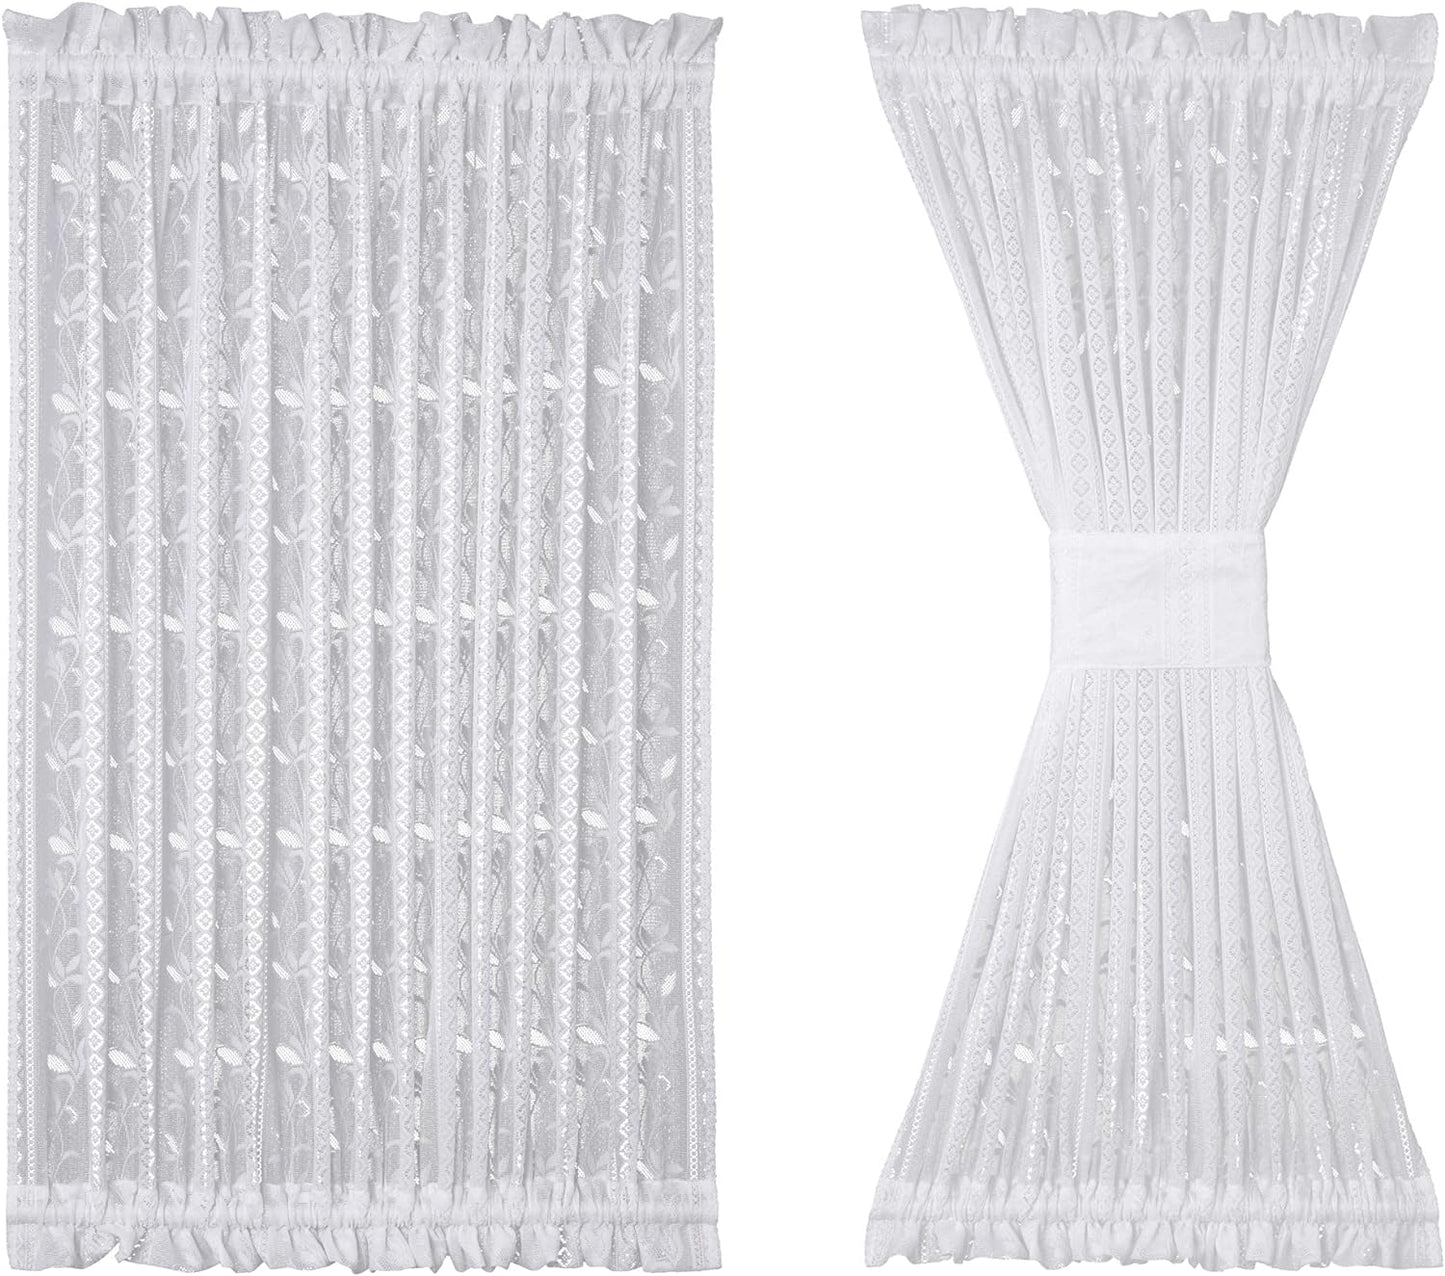 2 Pcs White Lace French Door Curtain Leaves Knitted Textured Voile Curtains 72 Inch Long Light Filtering Floral Sidelight Curtain Panel for Siding Glass Door Patio Front Door Tie-Backs Included  RLoncomix White 52" X 72" 1 Pc 